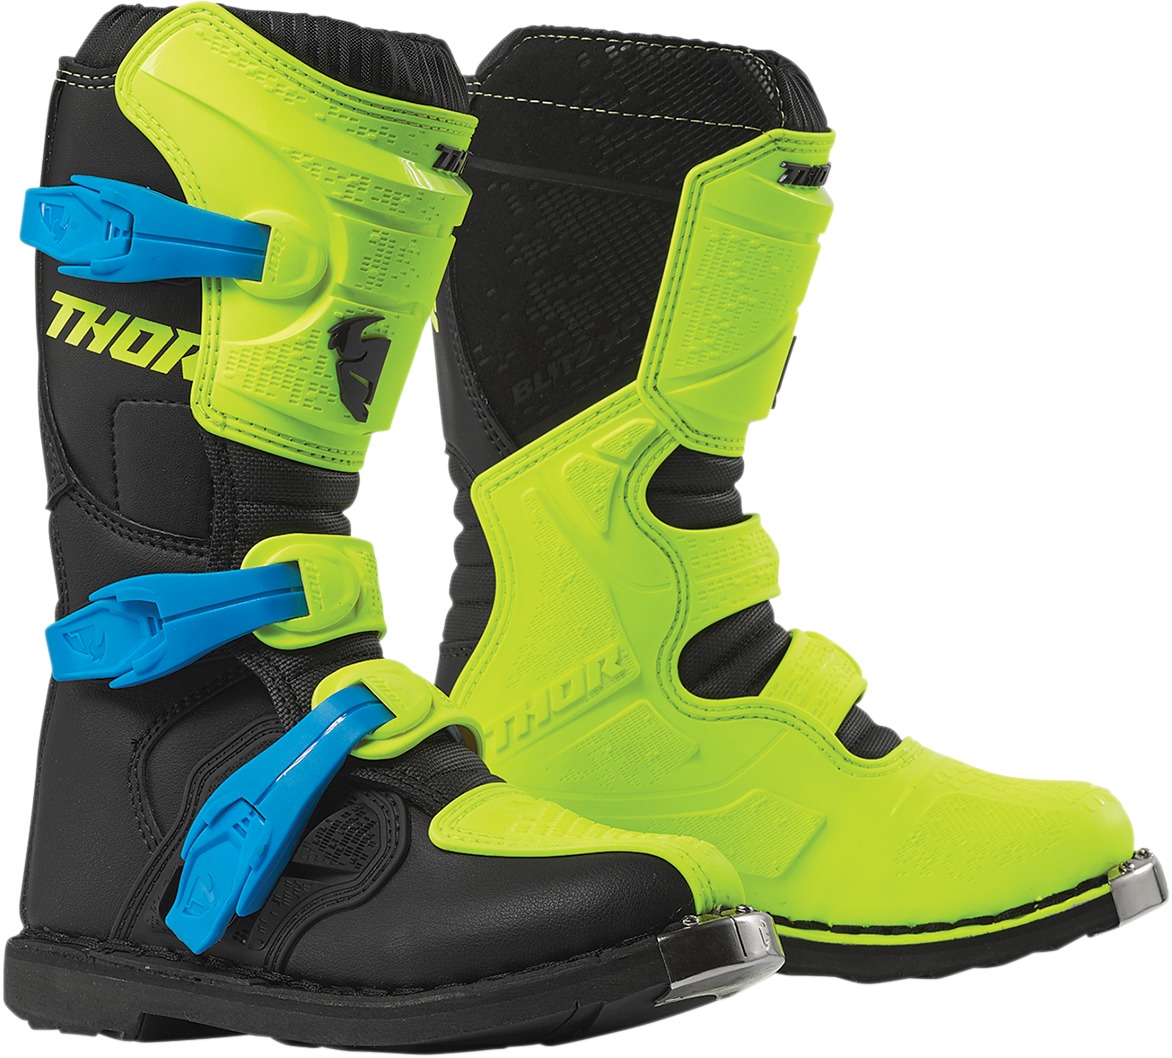 Blitz XP Dirt Bike Boots - Black & Flo Green MX Sole US Size Youth 03 - Click Image to Close